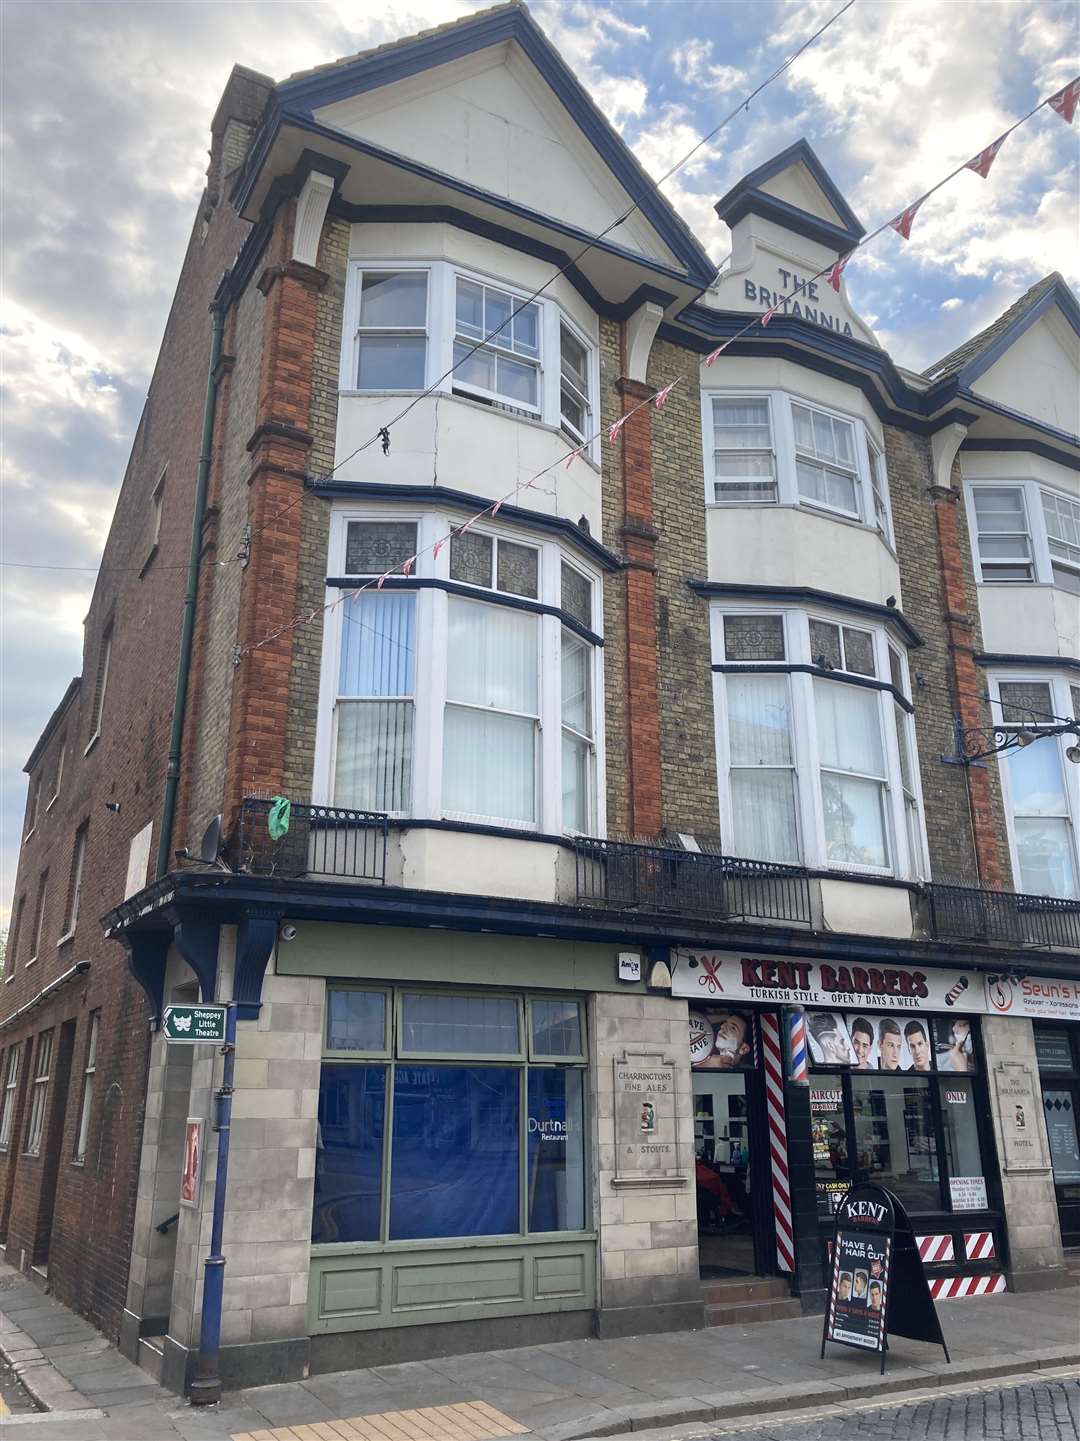 Durtnall's restaurant due to open in the former Britannia Hotel premises in Sheerness High Street on October 1